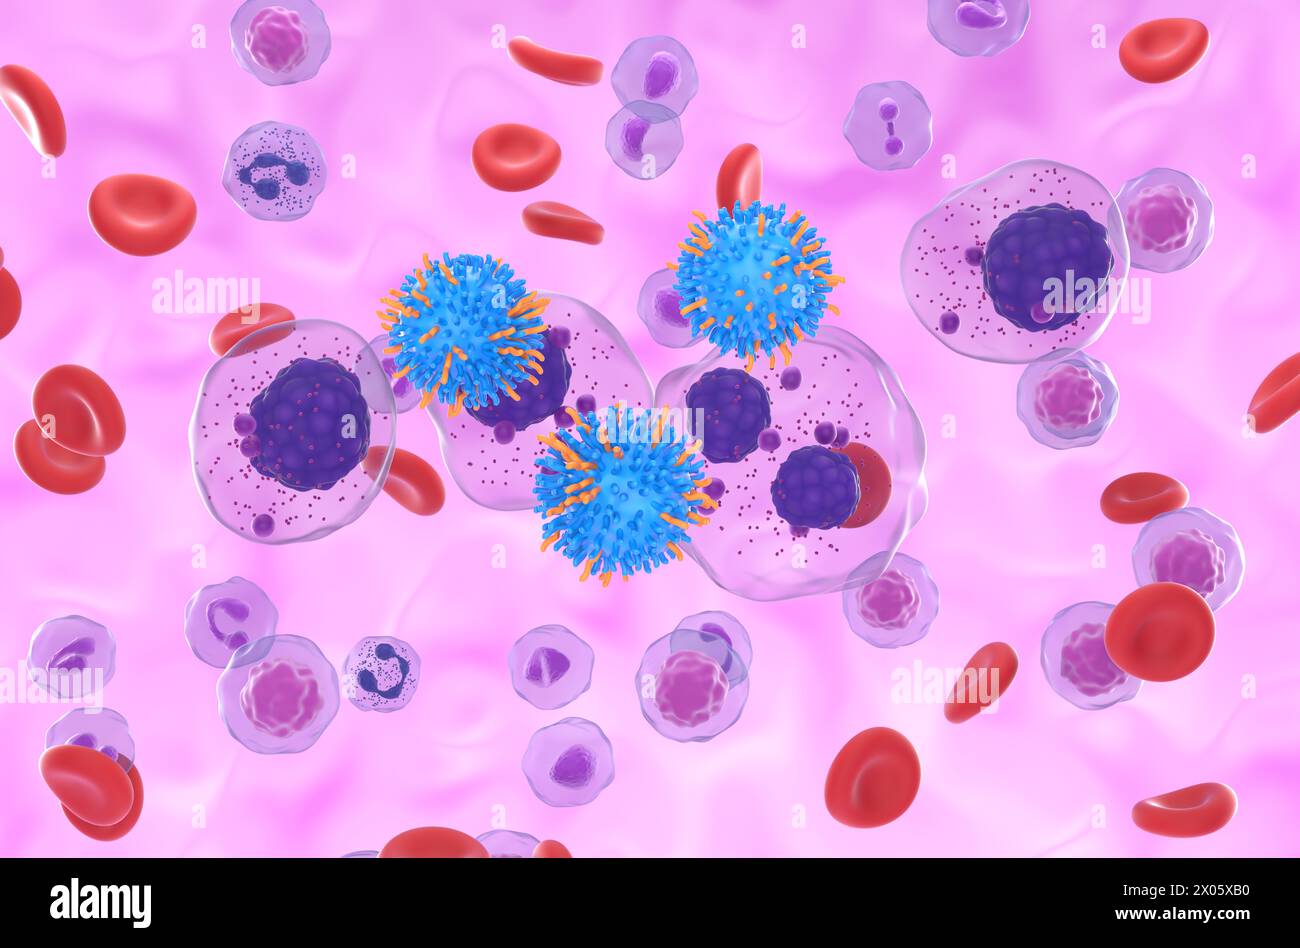 CAR T cell therapy in Multiple myeloma (MM) - isometric view 3d illustration Stock Photo